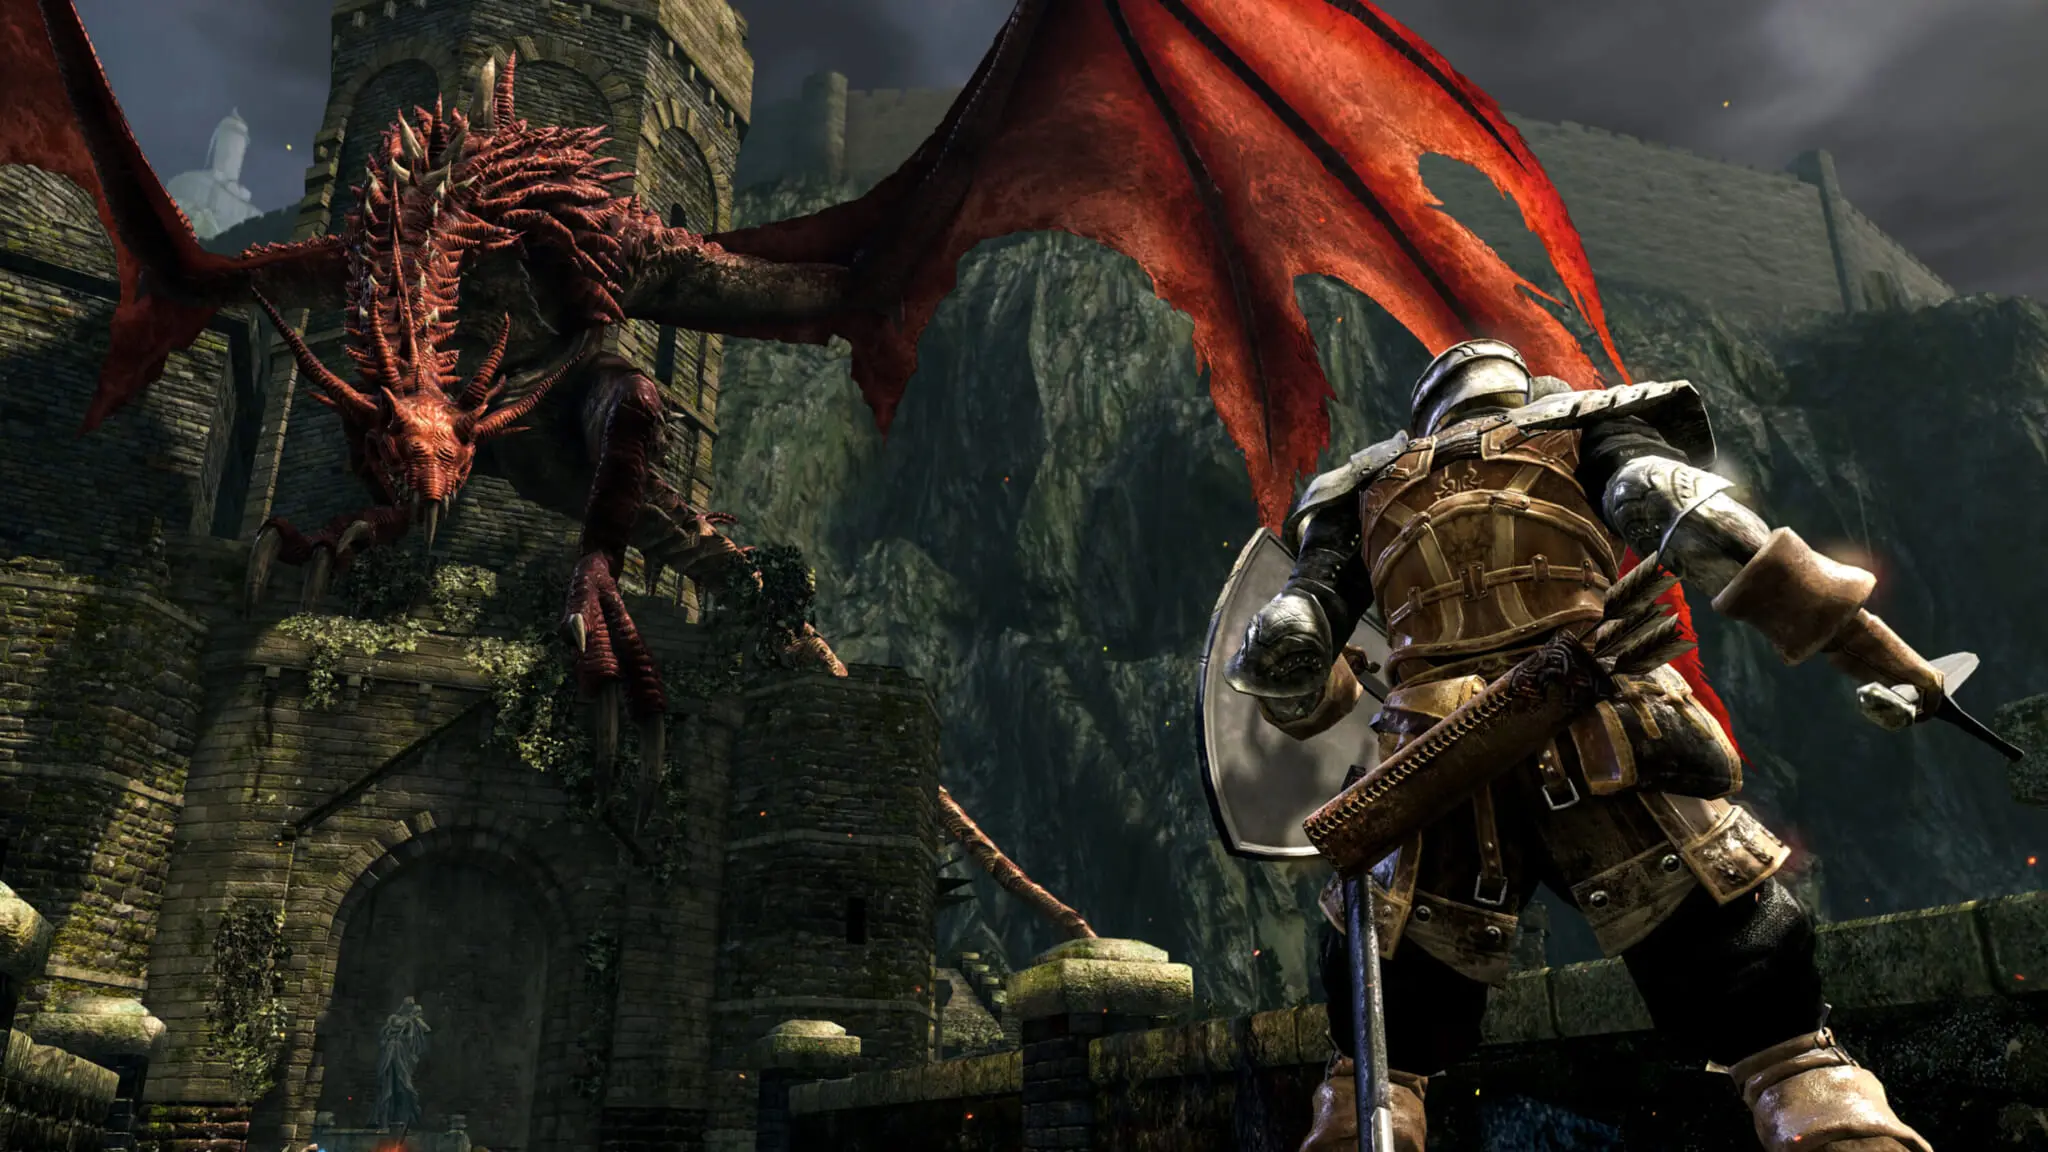 Future Dark Souls, FromSoftware Games Have a Final Frontier to Explore